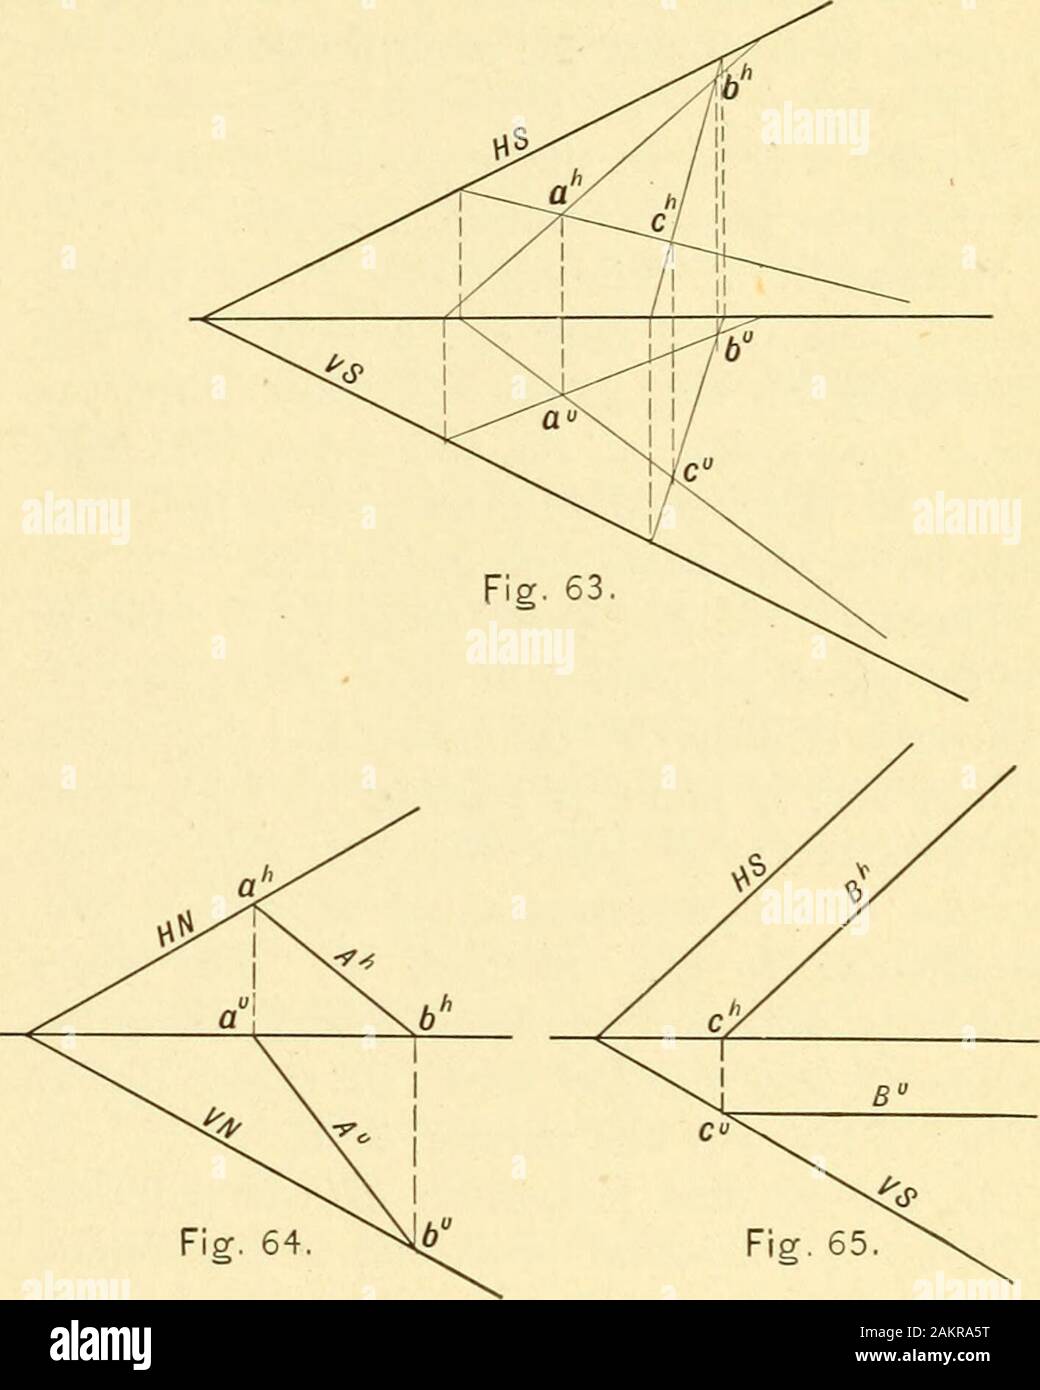 Descriptive geometry . ace of lineA; a^ is in GL (Art. 24, page 16). Con-tinue A^ to meet GL in 5 the horizontal pro-jection of the vertical trace; 6^, the verticaltrace, is in FiV. Connect a and h^ to obtain^^ the required vertical projection of line A. If A had been the given projection, A^would have been similarly determined. If the given projection, B^, Fig. 65, be par-allel to (7X, B will be parallel to HS for, ifa line lying in an inclined plane has one pro-jection parallel to the ground line, the other pro-jection is parallel to the trace of the plane; and PROJECTION OF LINES IN PLANE Stock Photo